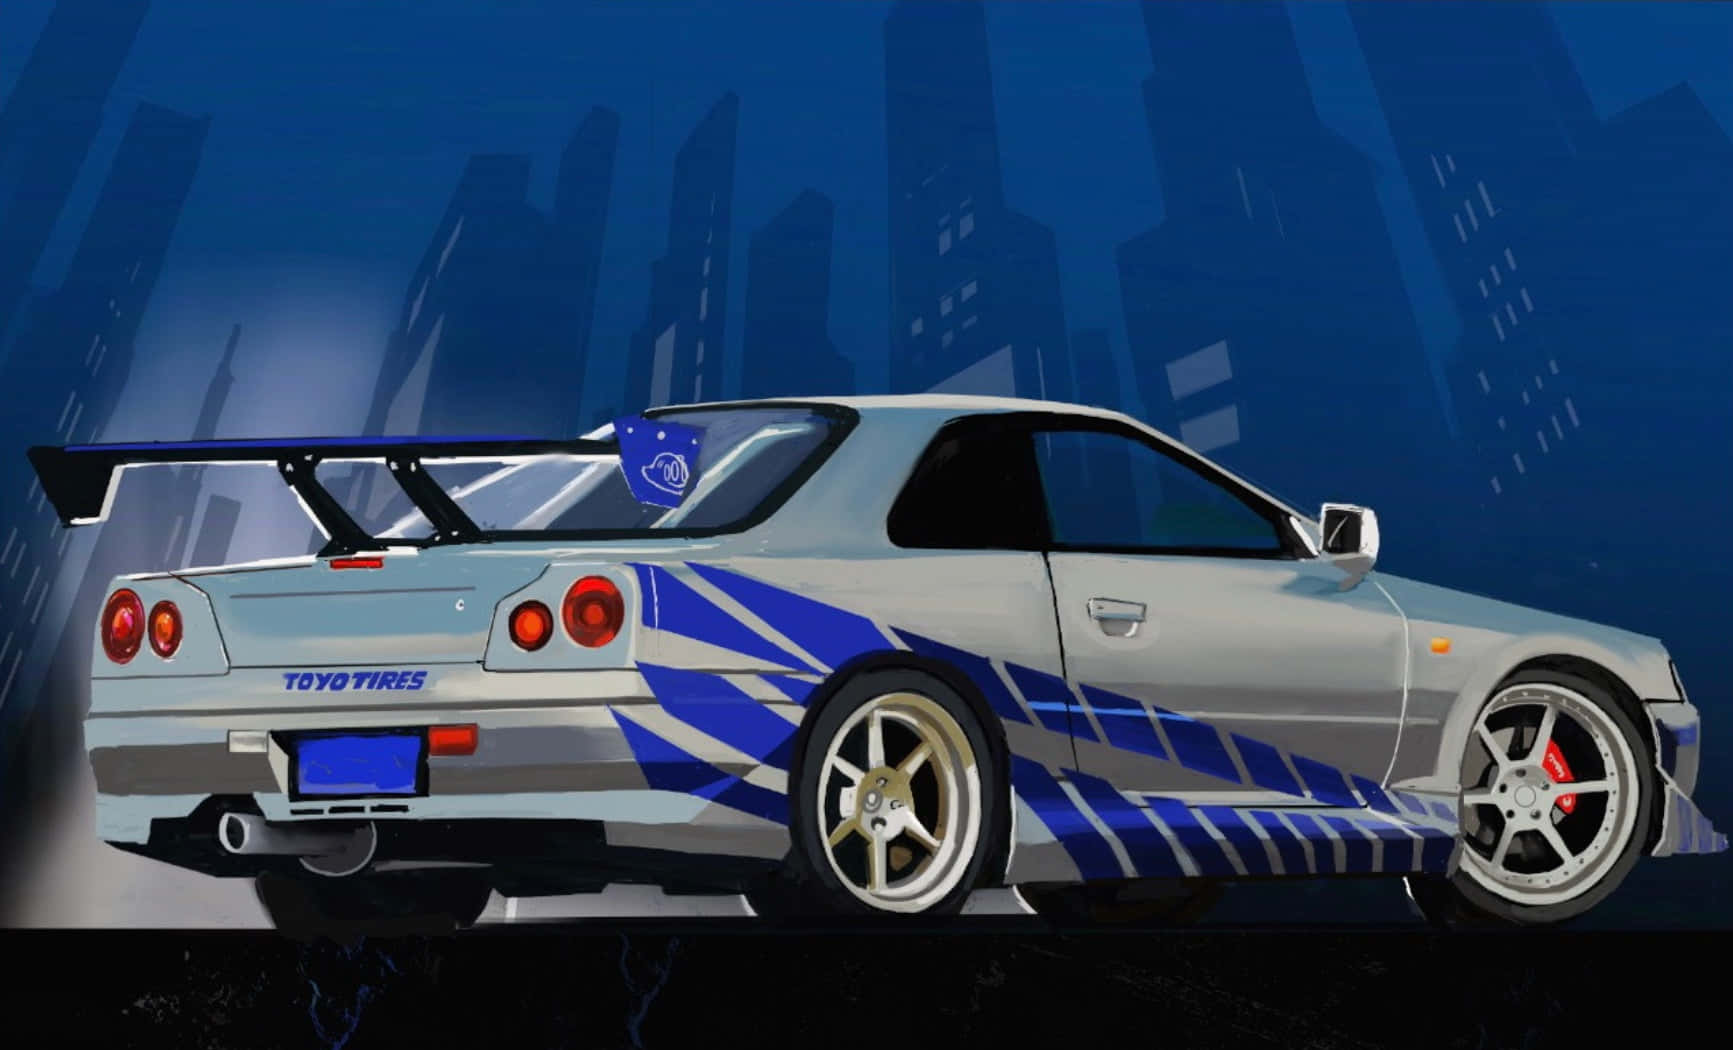 Paul Walker making his mark with the iconic Nissan Skyline Wallpaper